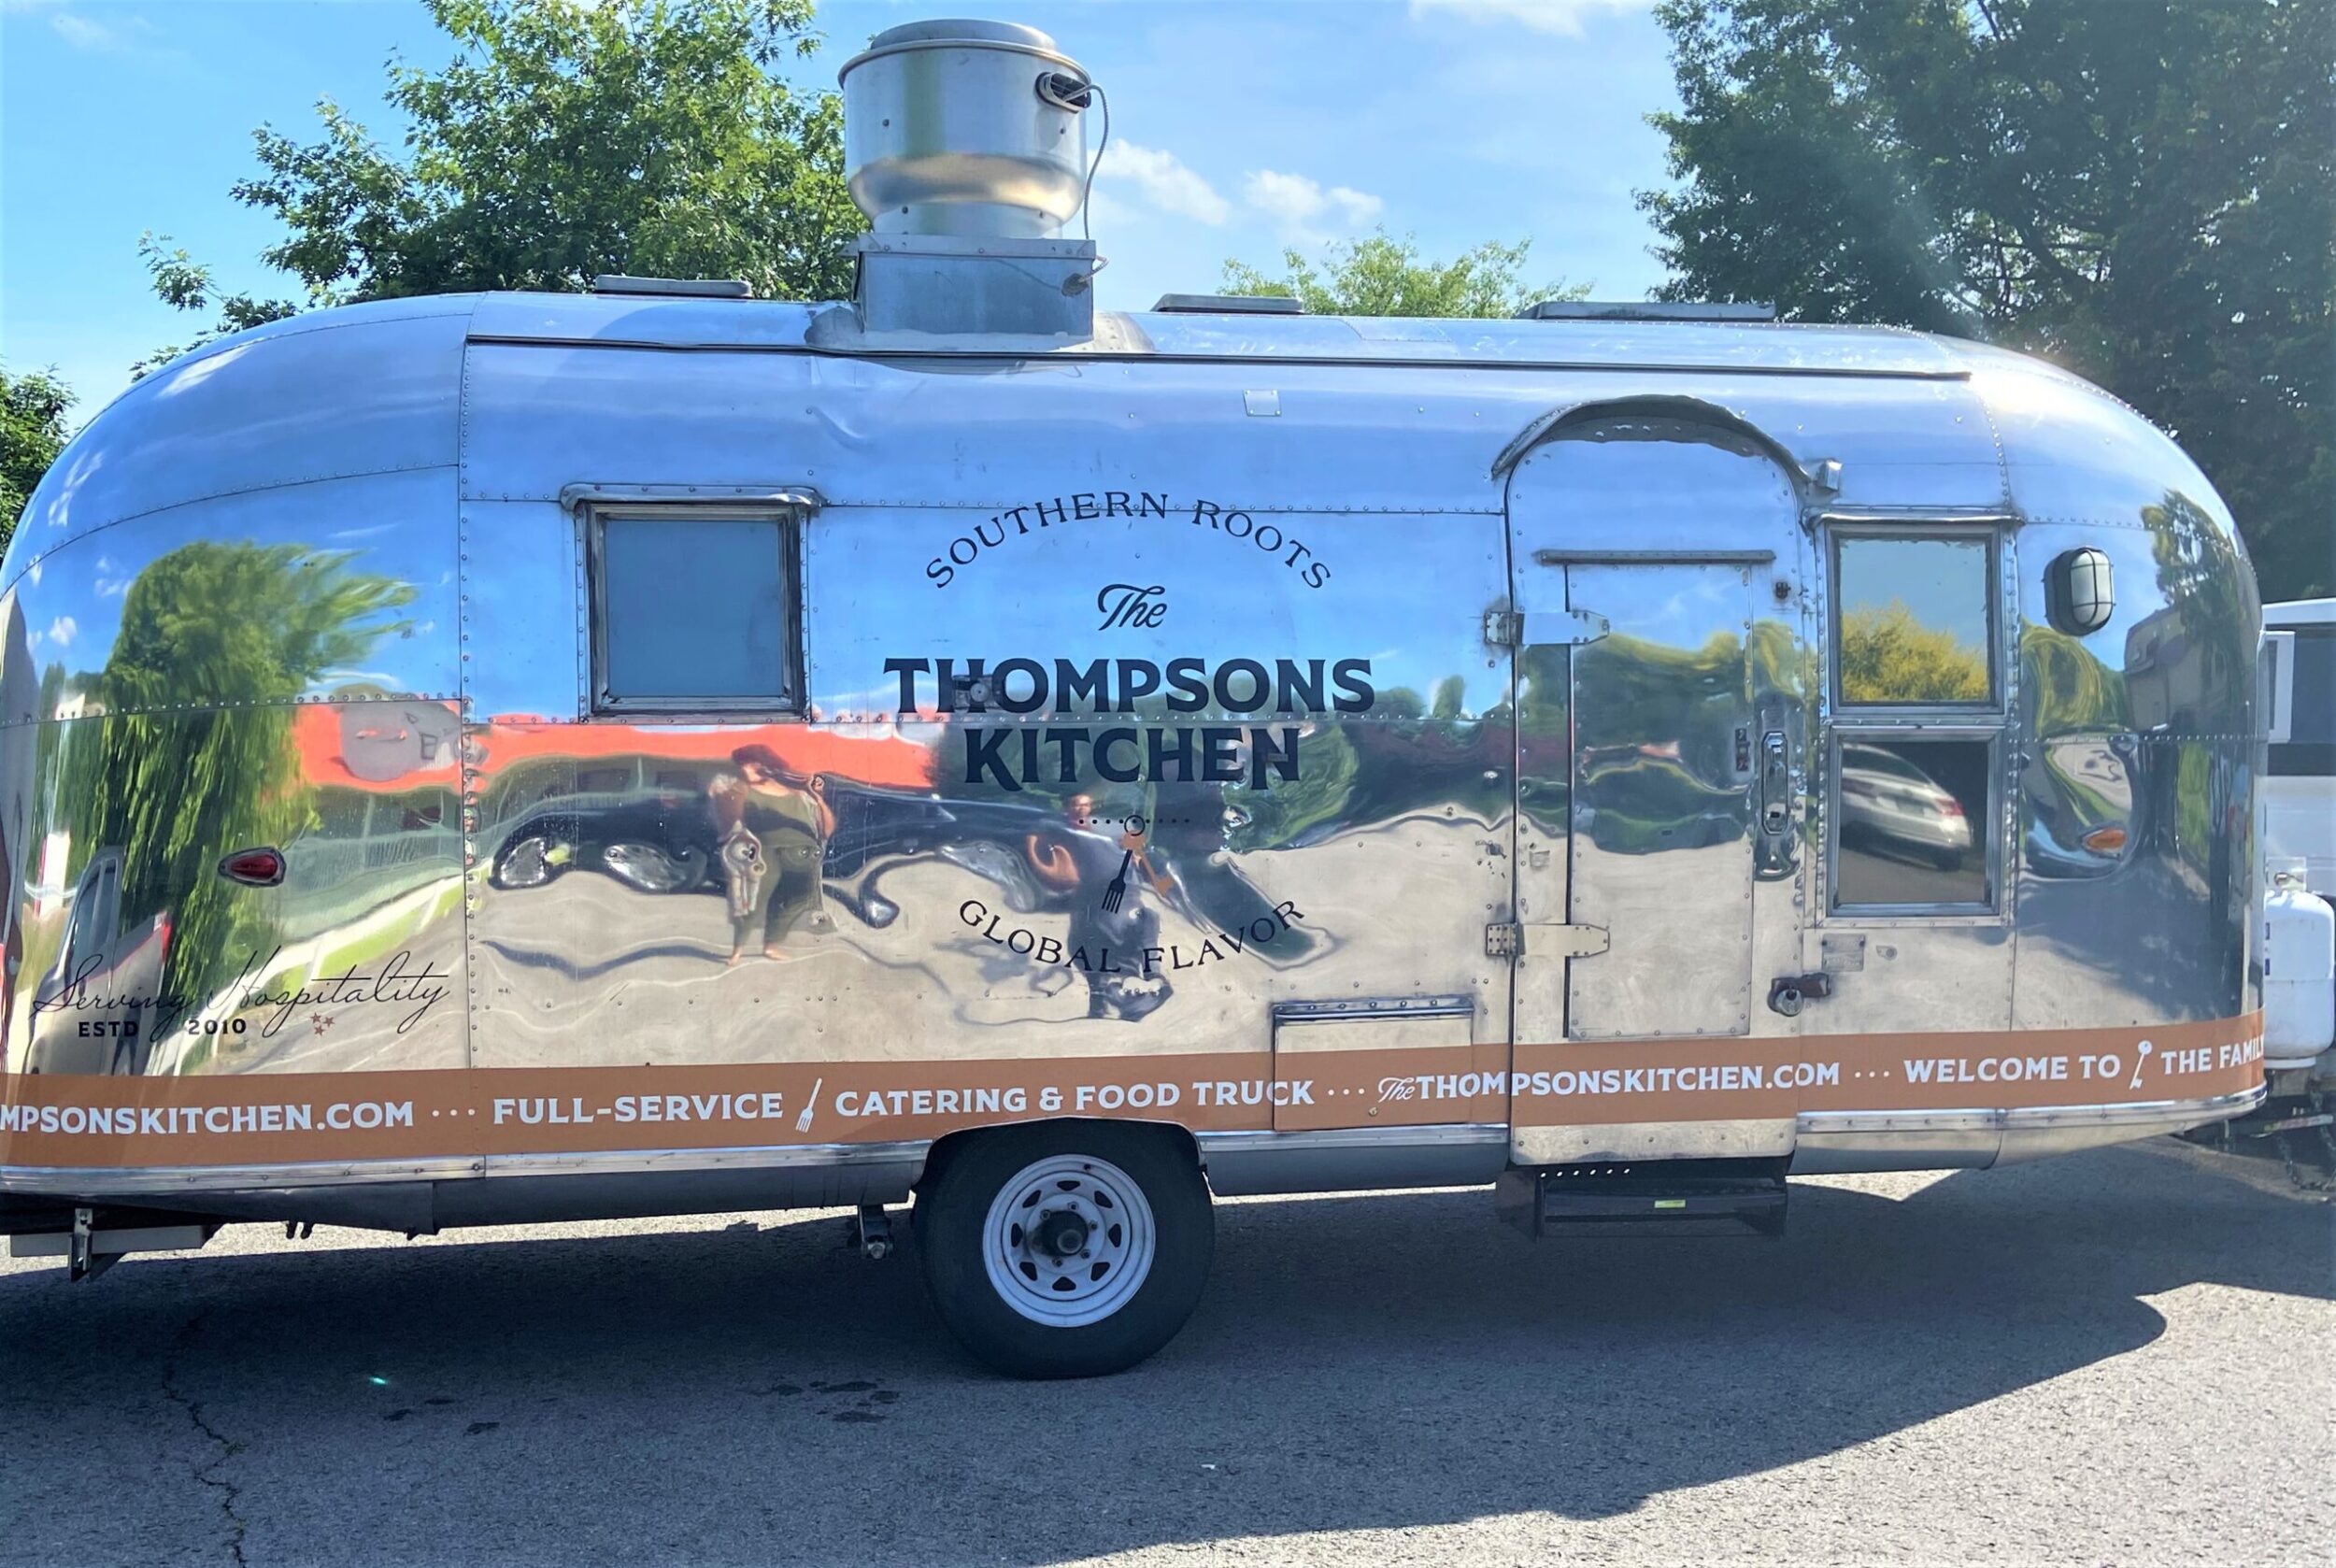 Food Truck Decals for The Thompsons Kitchen in Nashville, TN Installed & Fabricated by 12-Point SignWorks